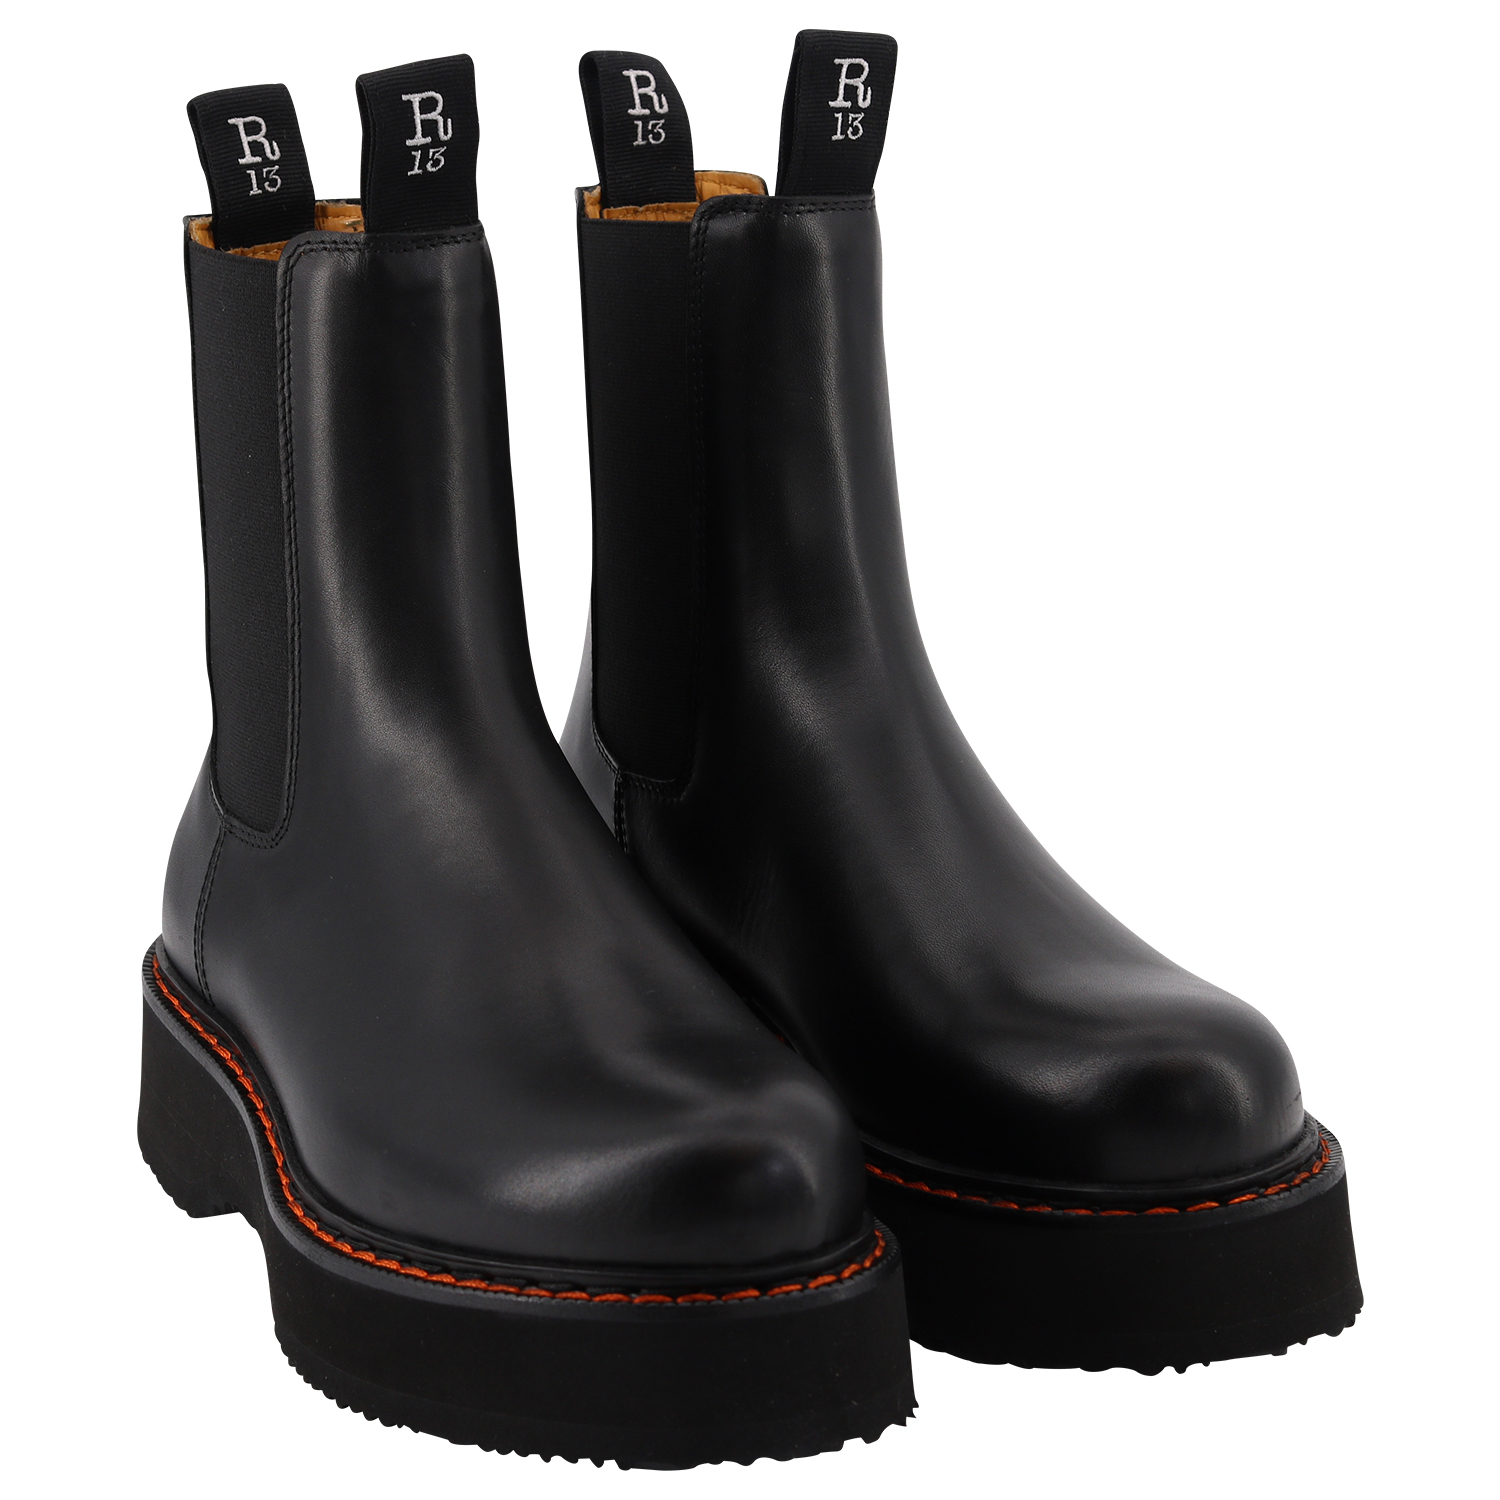 R13 Single Stack Chelsea Boots Black